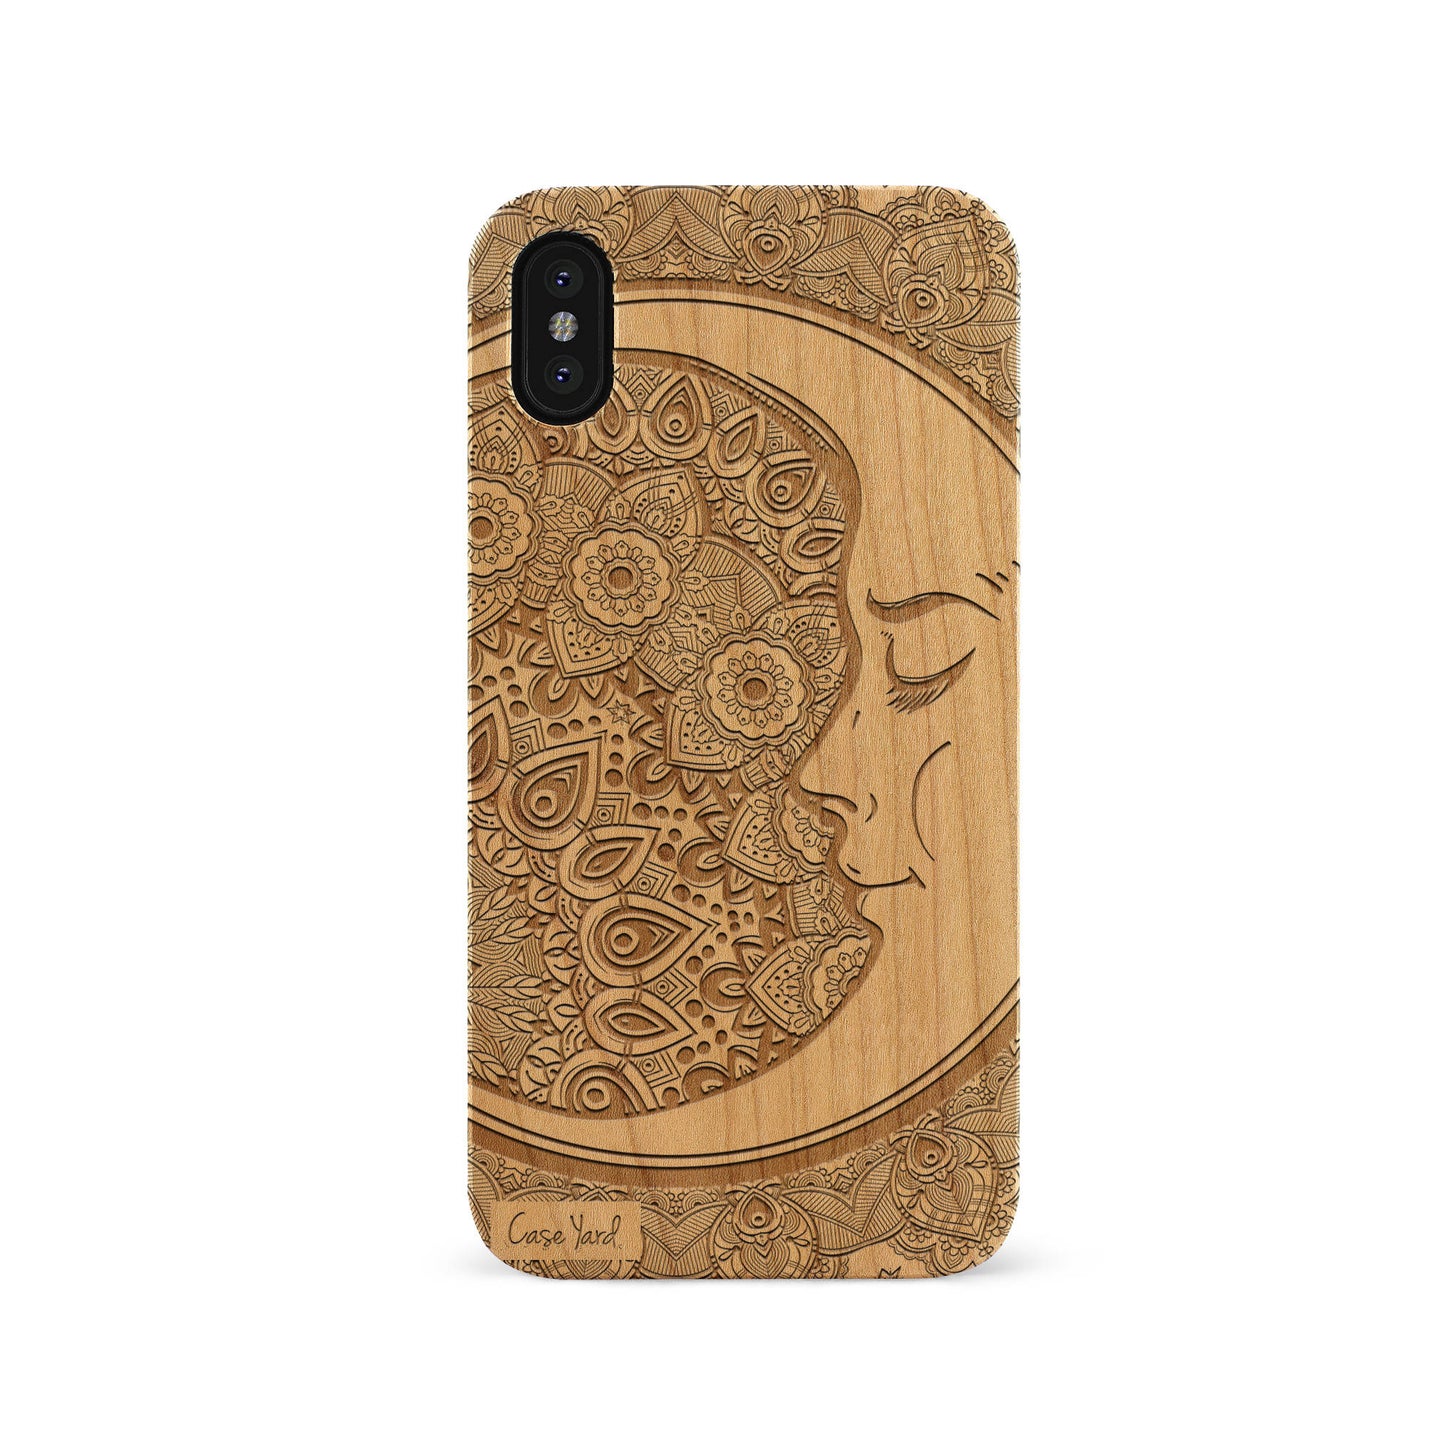 Wooden Cell Phone Case Cover, Laser Engraved case for iPhone & Samsung phone Moon Mandala Design